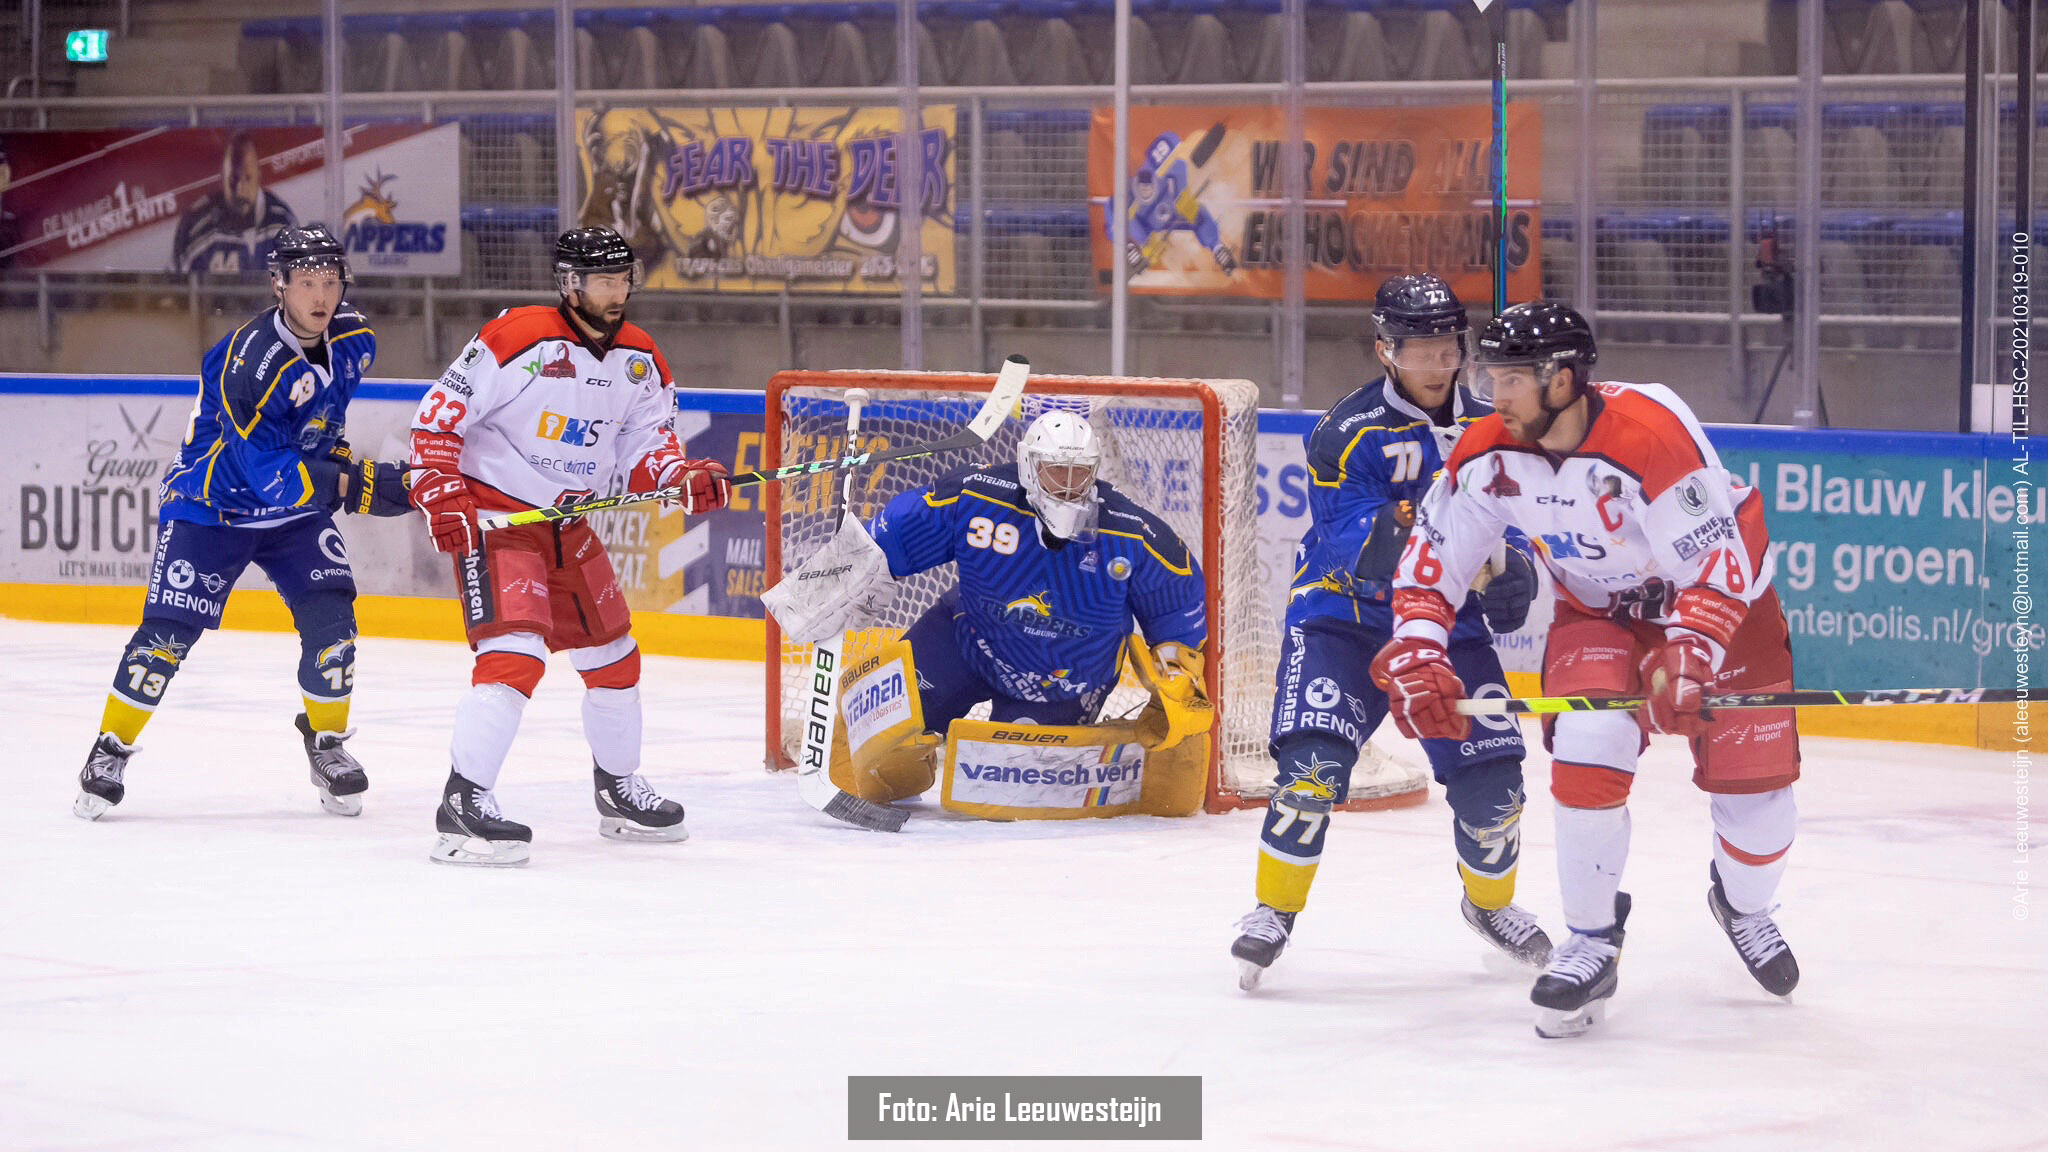 Tilburg Trappers vs. Hannover Scorpions (1-4)